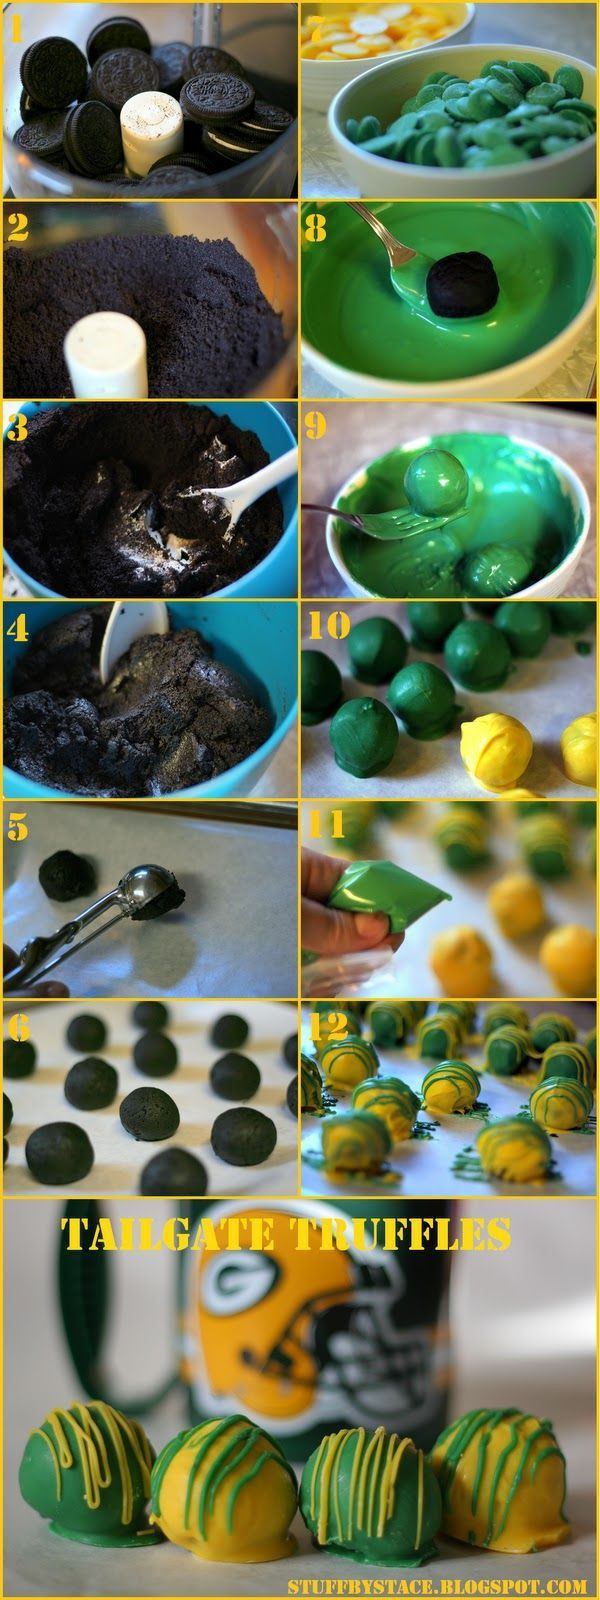 Packer Party Food Ideas
 Tailgate truffles are an easy and delicious dessert Add